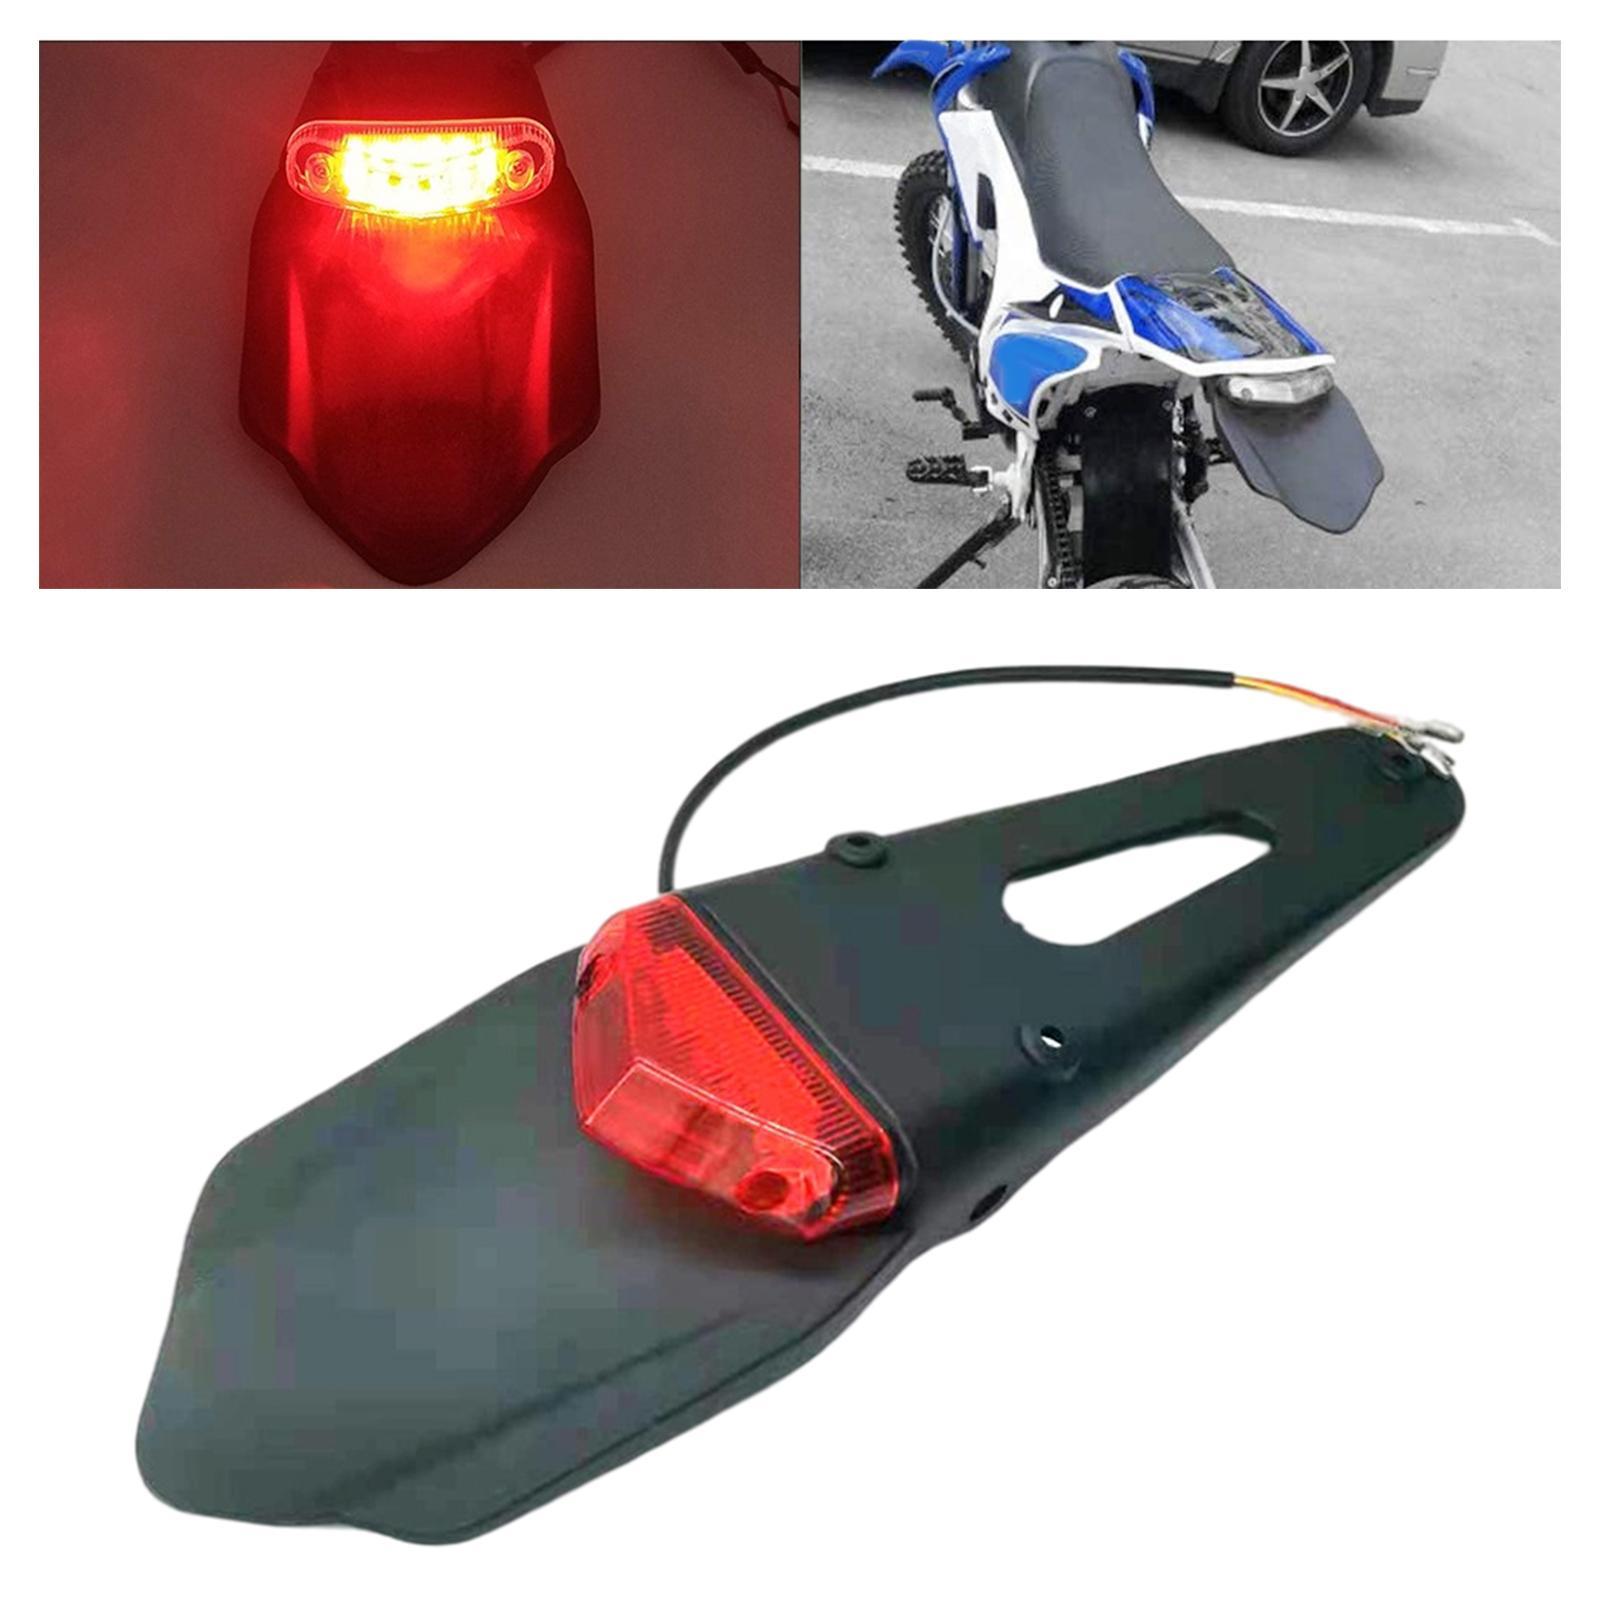 Universal Motorcycle Rear Mudguard with Brake Lamp Durable High Performance Accessories License Plate Bracket Holder Off-Road Bike